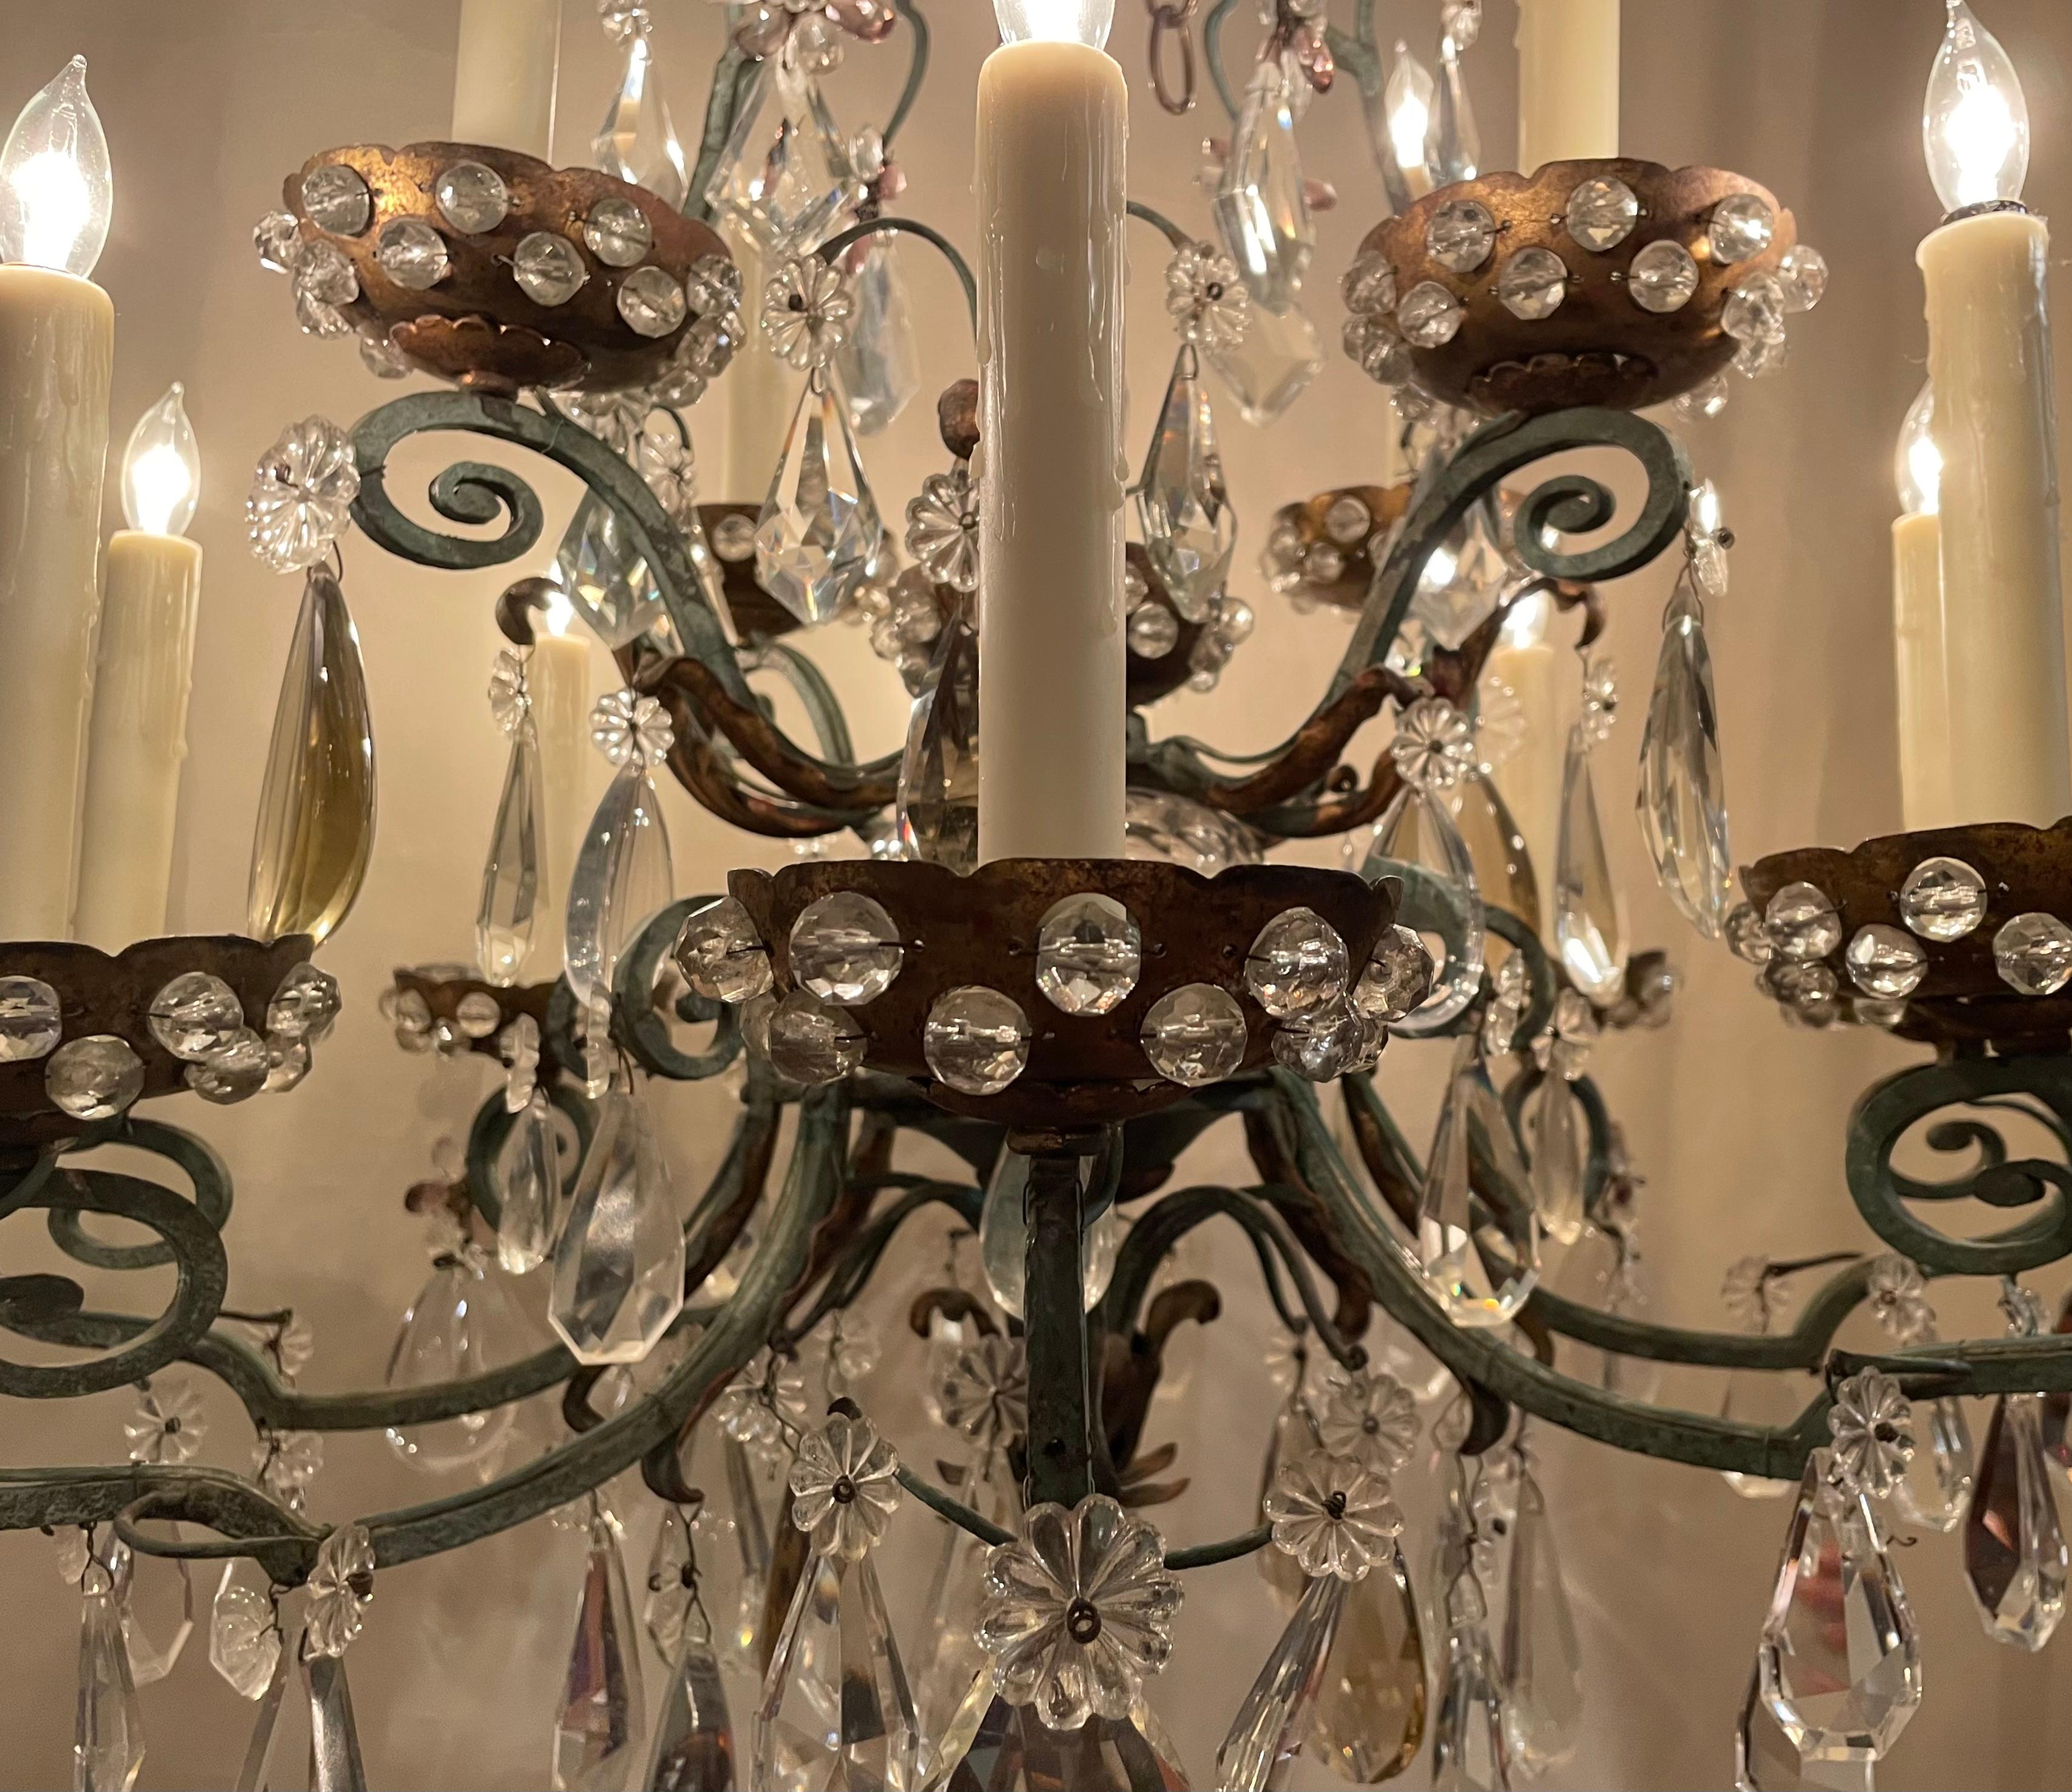 Antique French Wrought Iron and Crystal Chandelier, circa 1900.